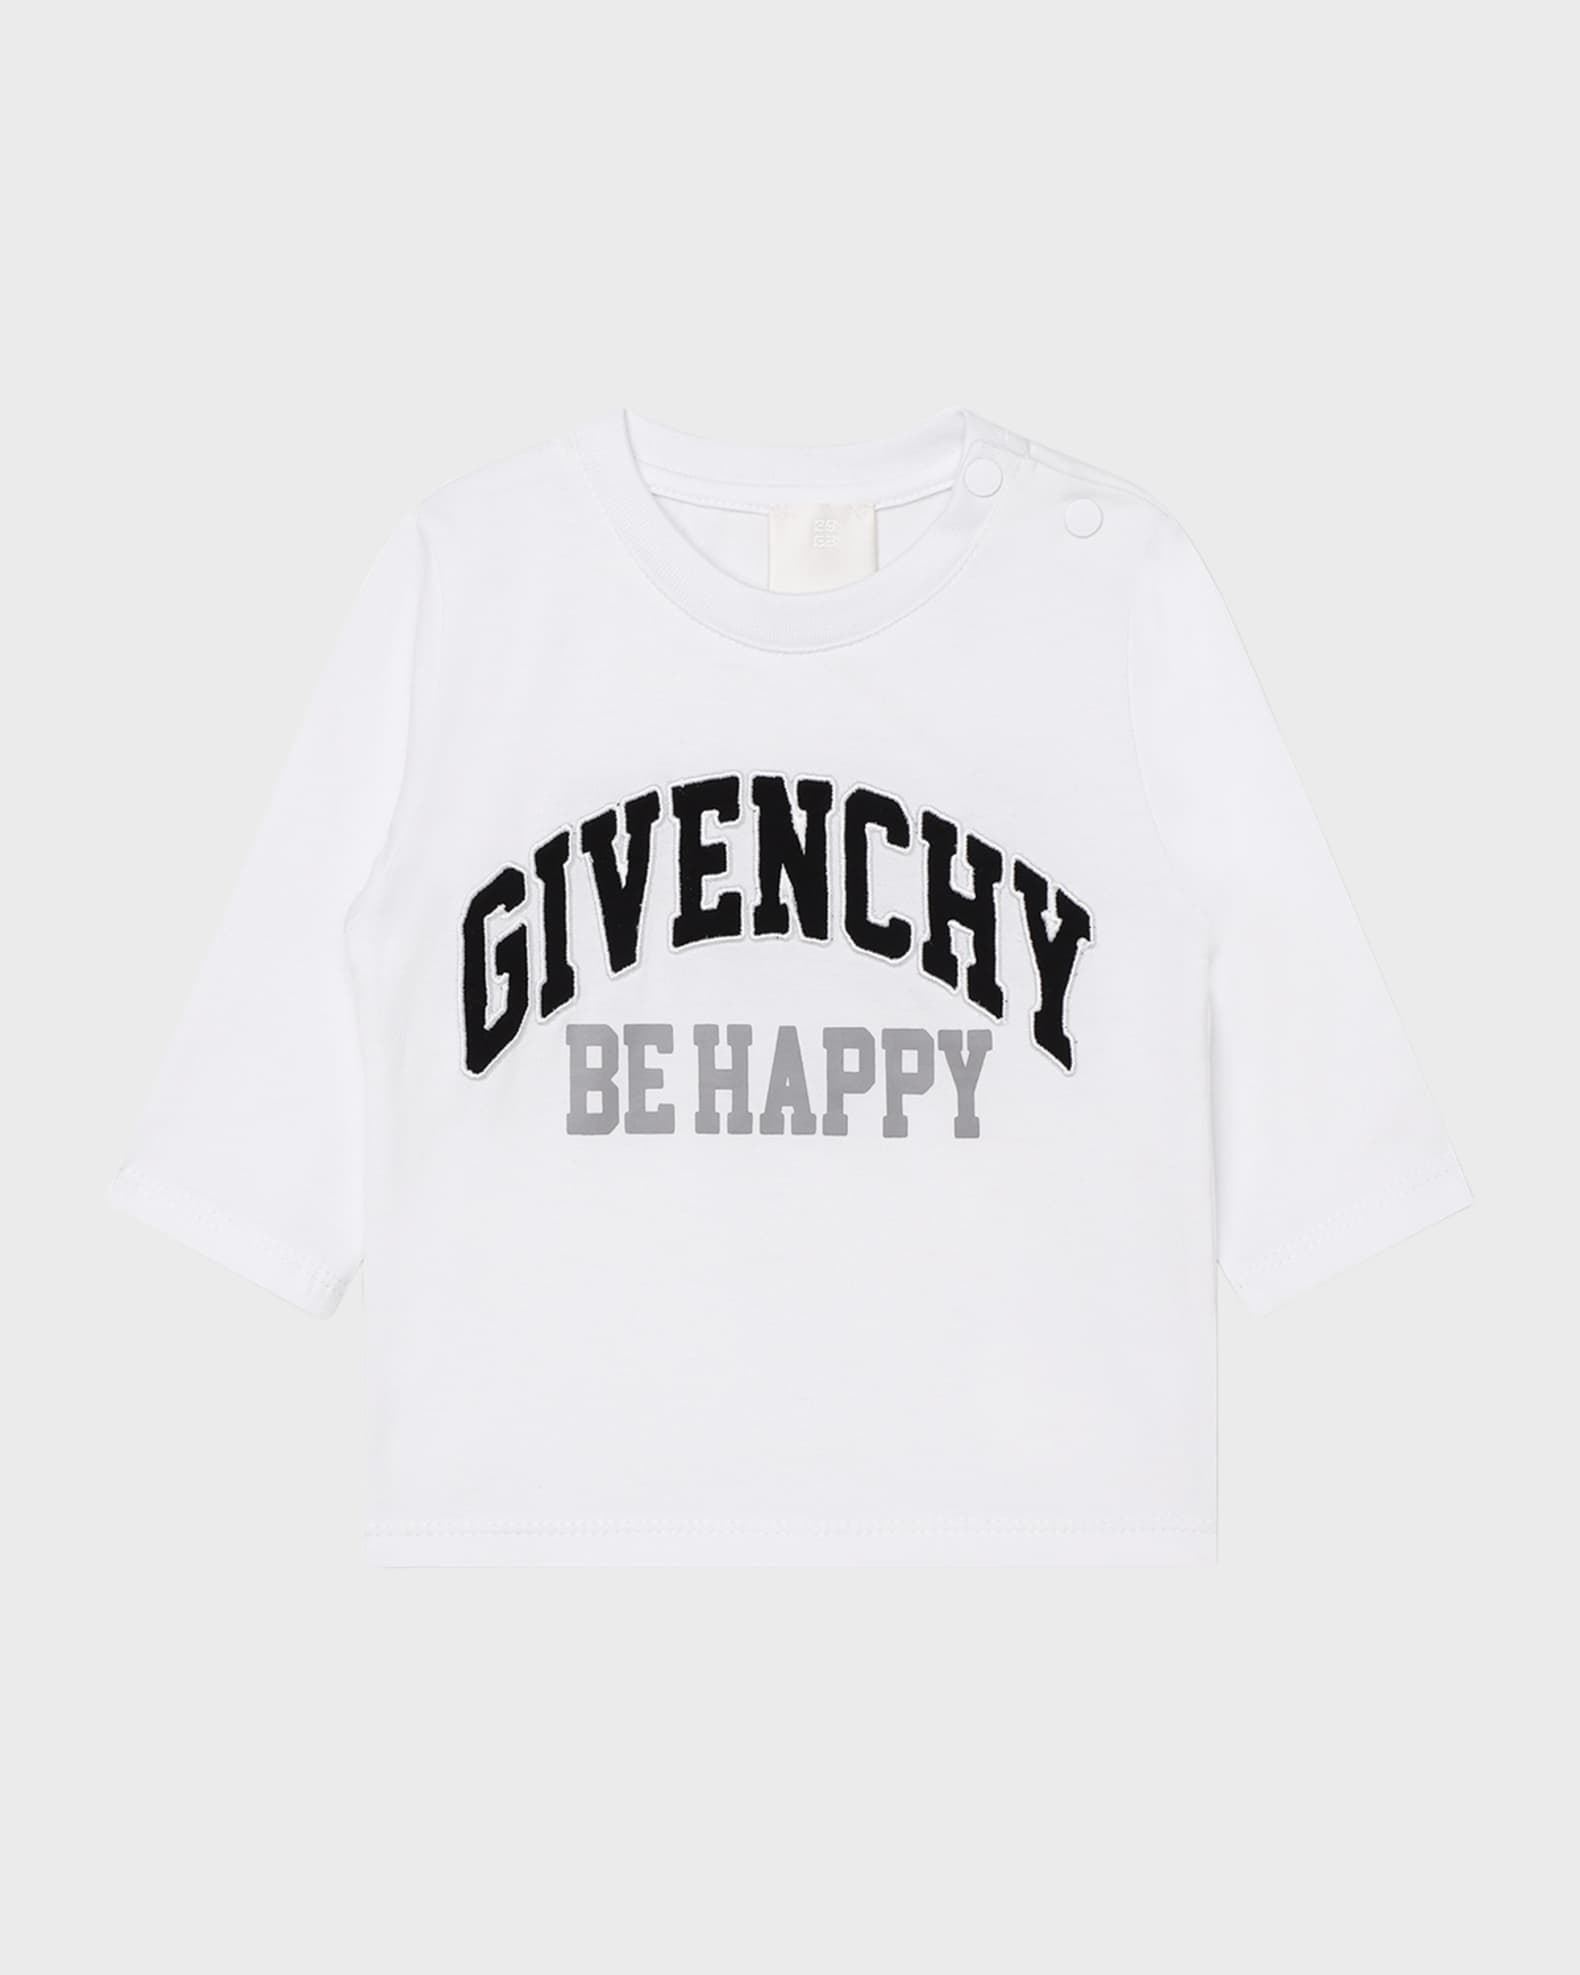 Givenchy Boy's Long-Sleeve Embroidered Logo T-Shirt, Size 6M-3